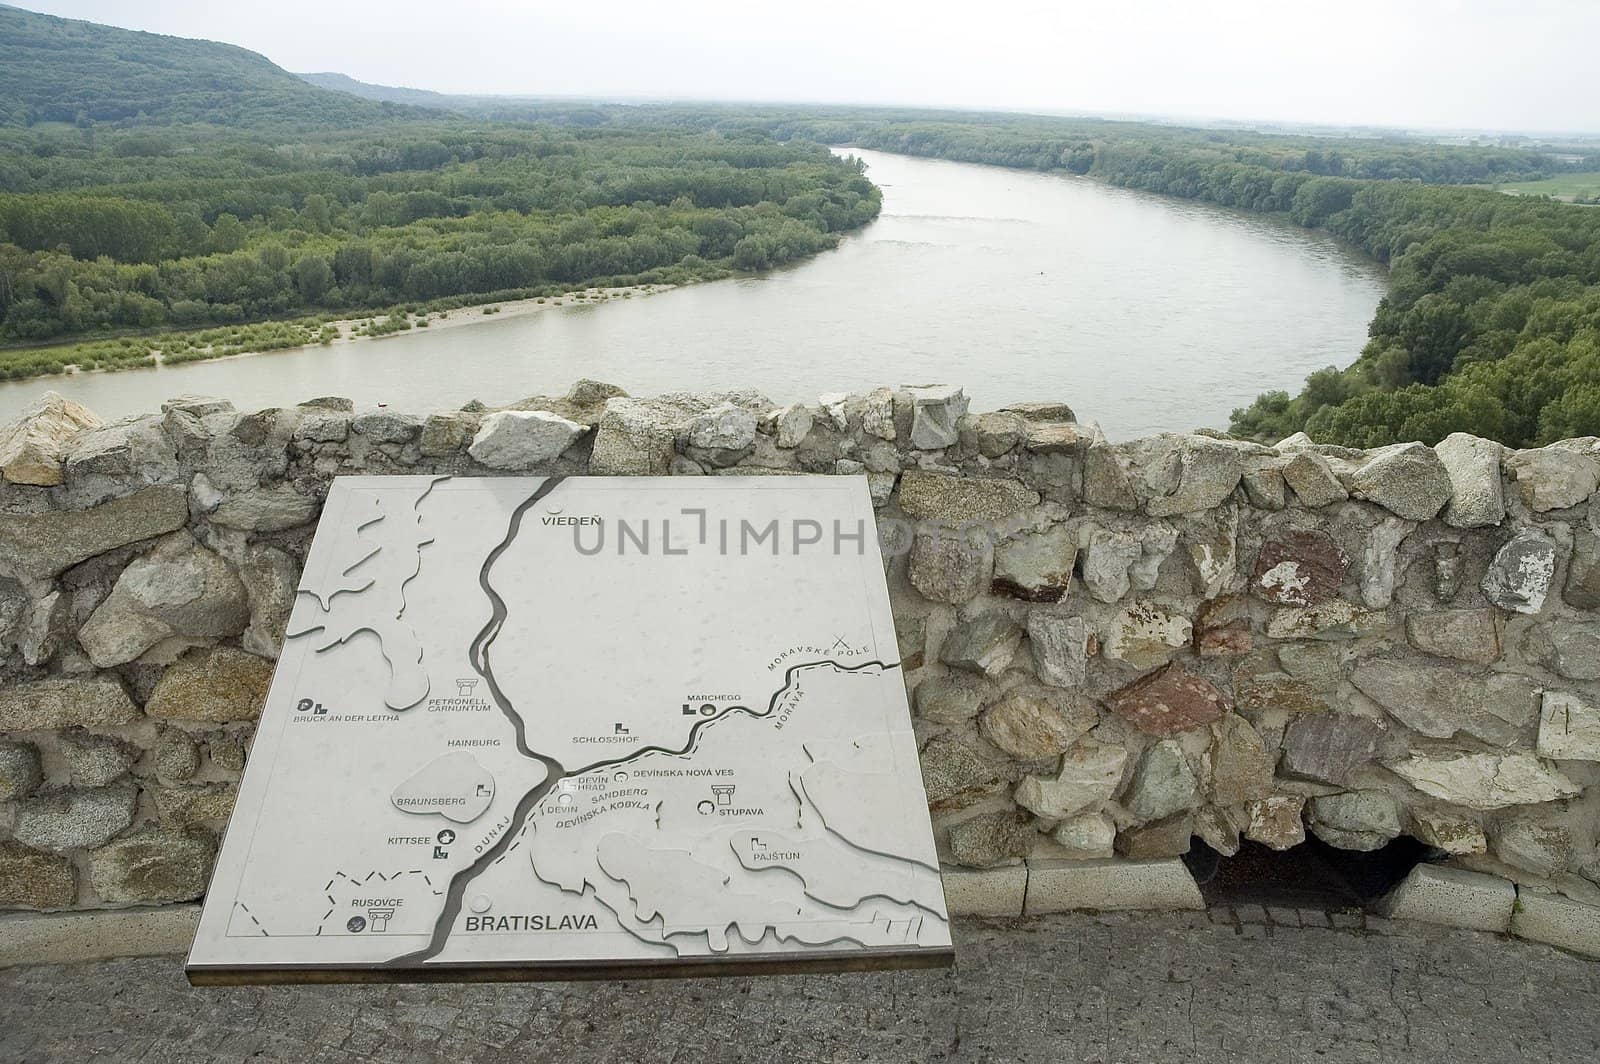 view from famous landmark - devin castle, river donau dividing slovakia and austria, map in foreground